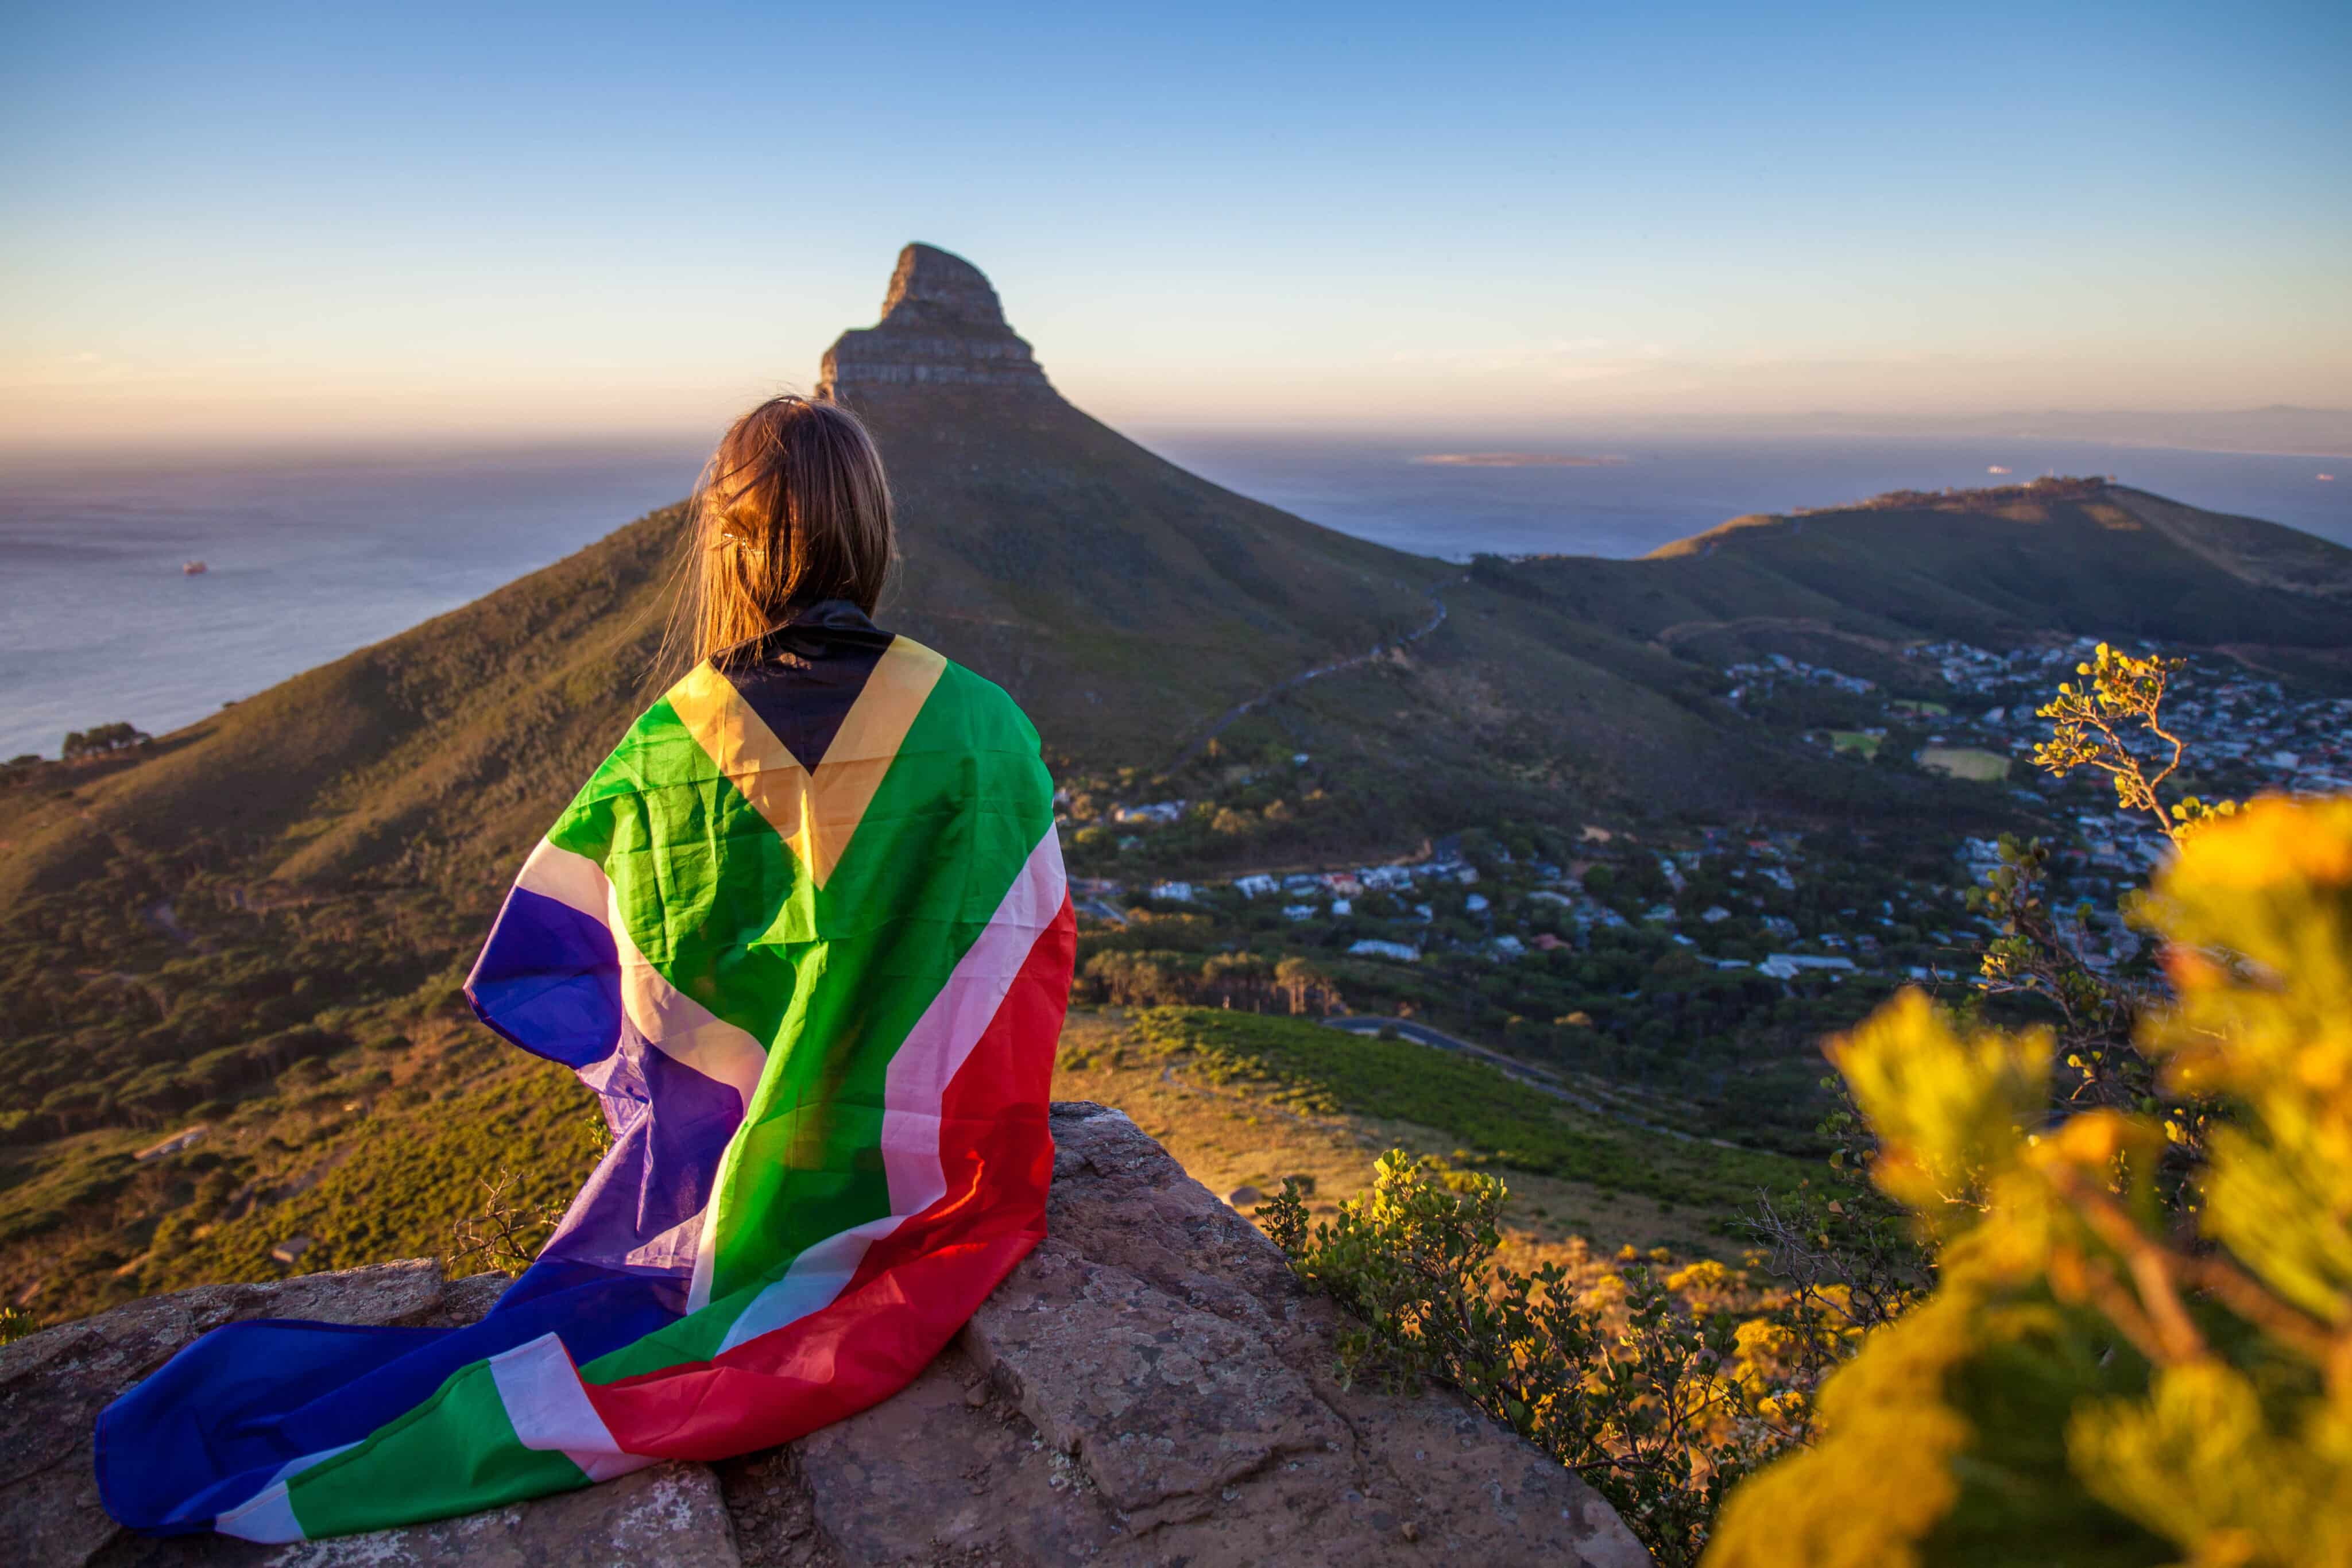 South African National Assembly Approves Bill Legalizing Cannabis for Personal Use